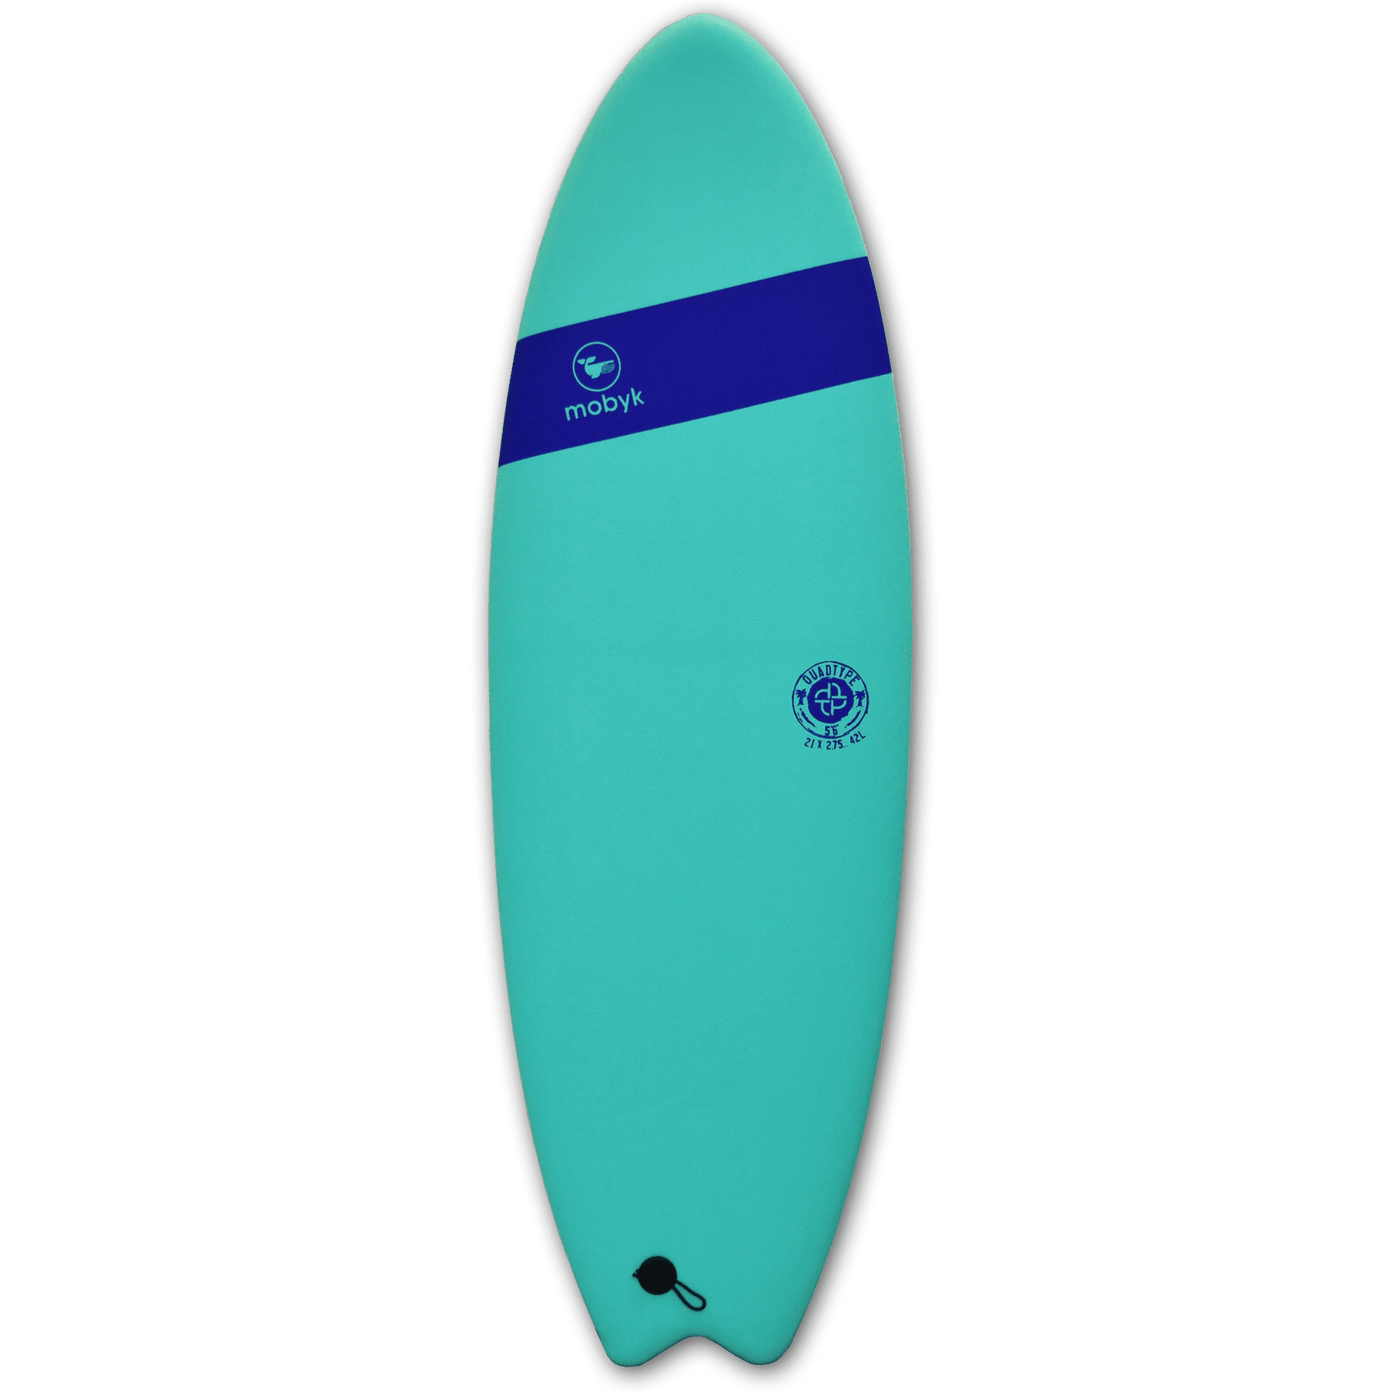 Mobyk 5'6 Quad Fish Softboard - Turquoise Mobyk